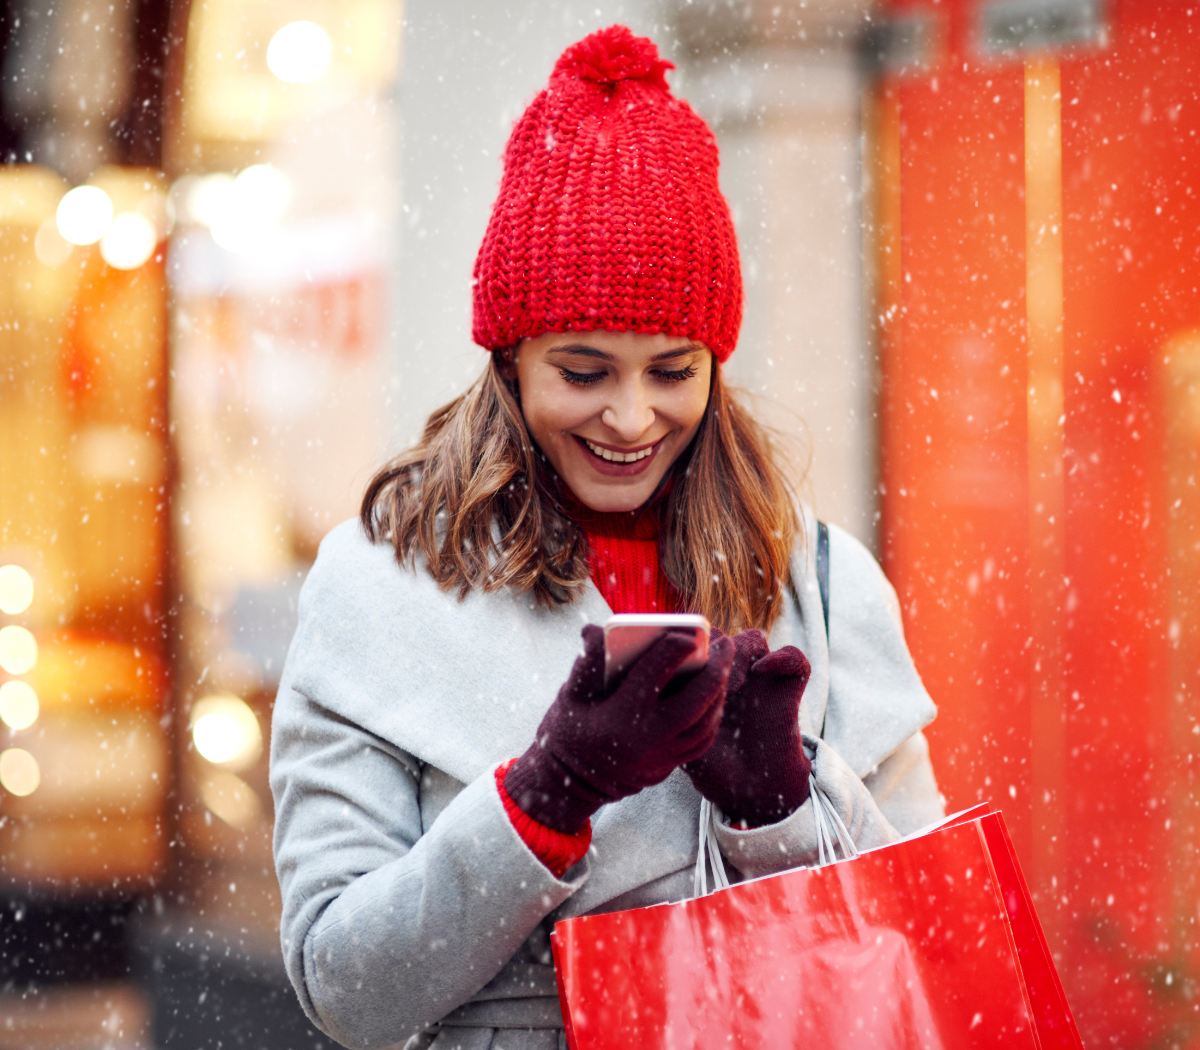 Retail Season is Here: Use These Year-End SMS Promotions to Grow Your Business